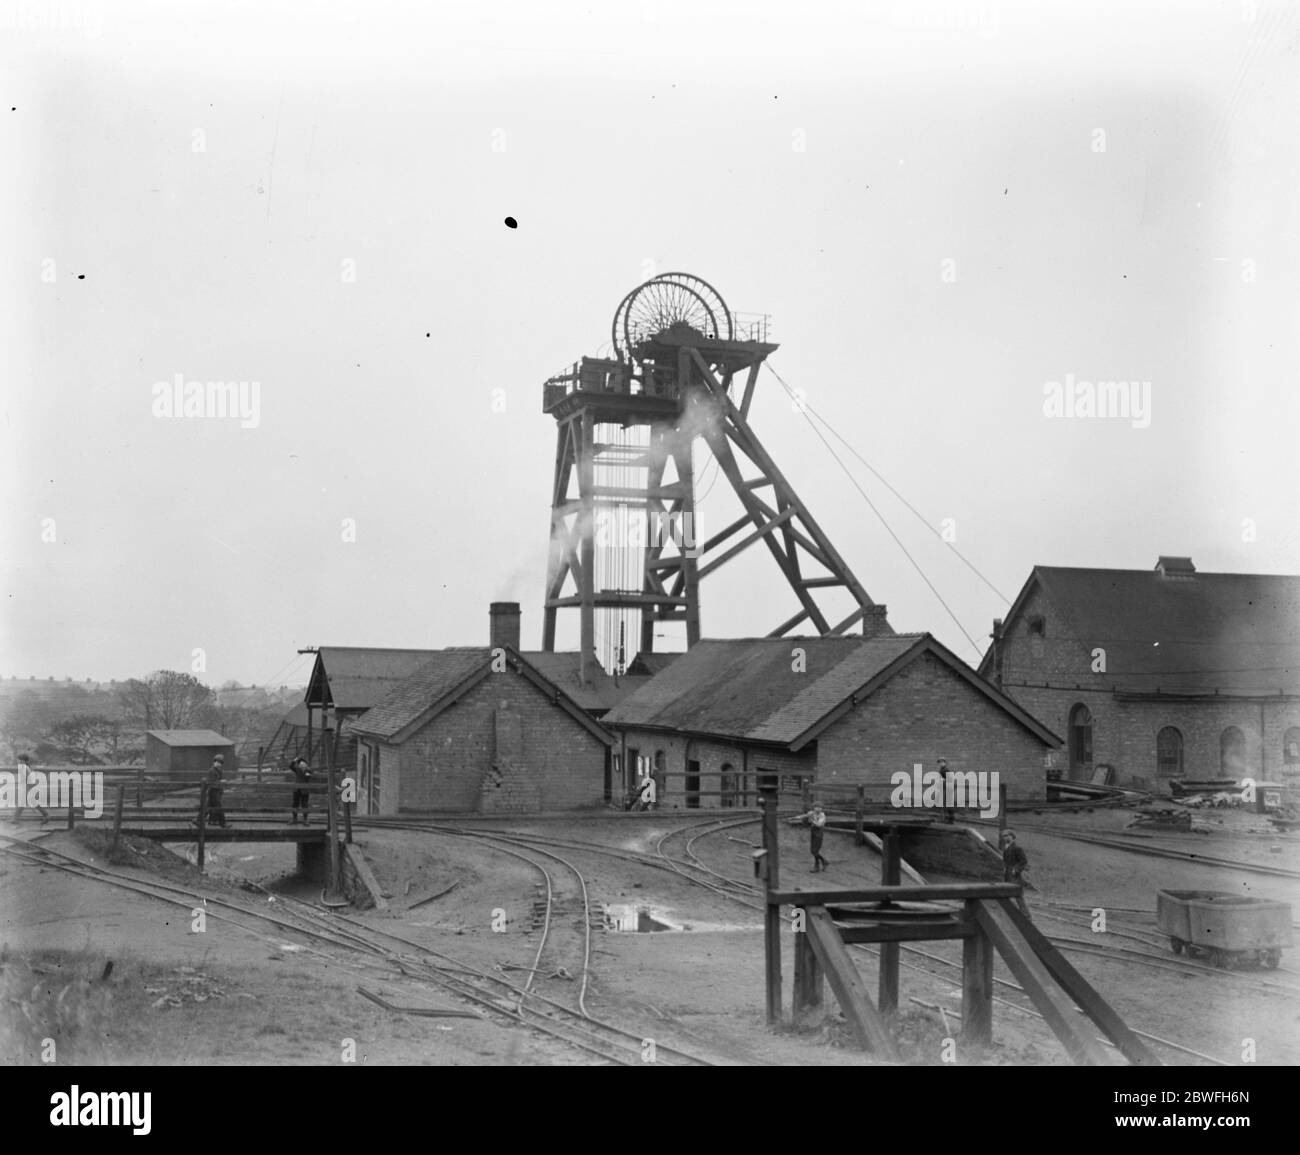 Holly Bank Colliery Essington Staffordshire dicembre 1920 Foto Stock